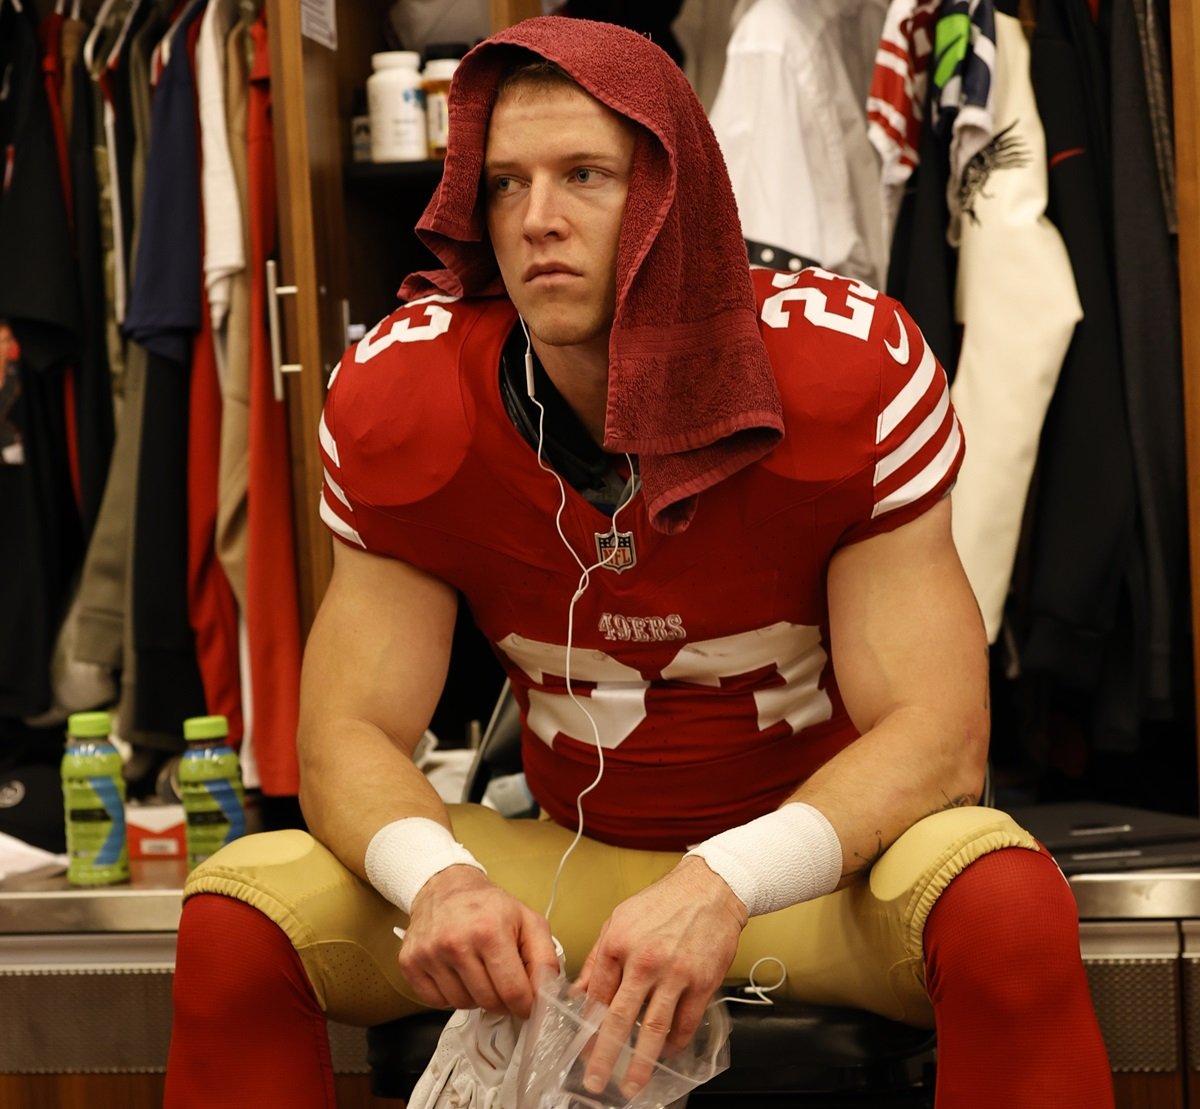 Christian McCaffrey #23 of the San Francisco 49ers in the locker room before the NFC Championship game against the Detroit Lions at Levi's Stadium